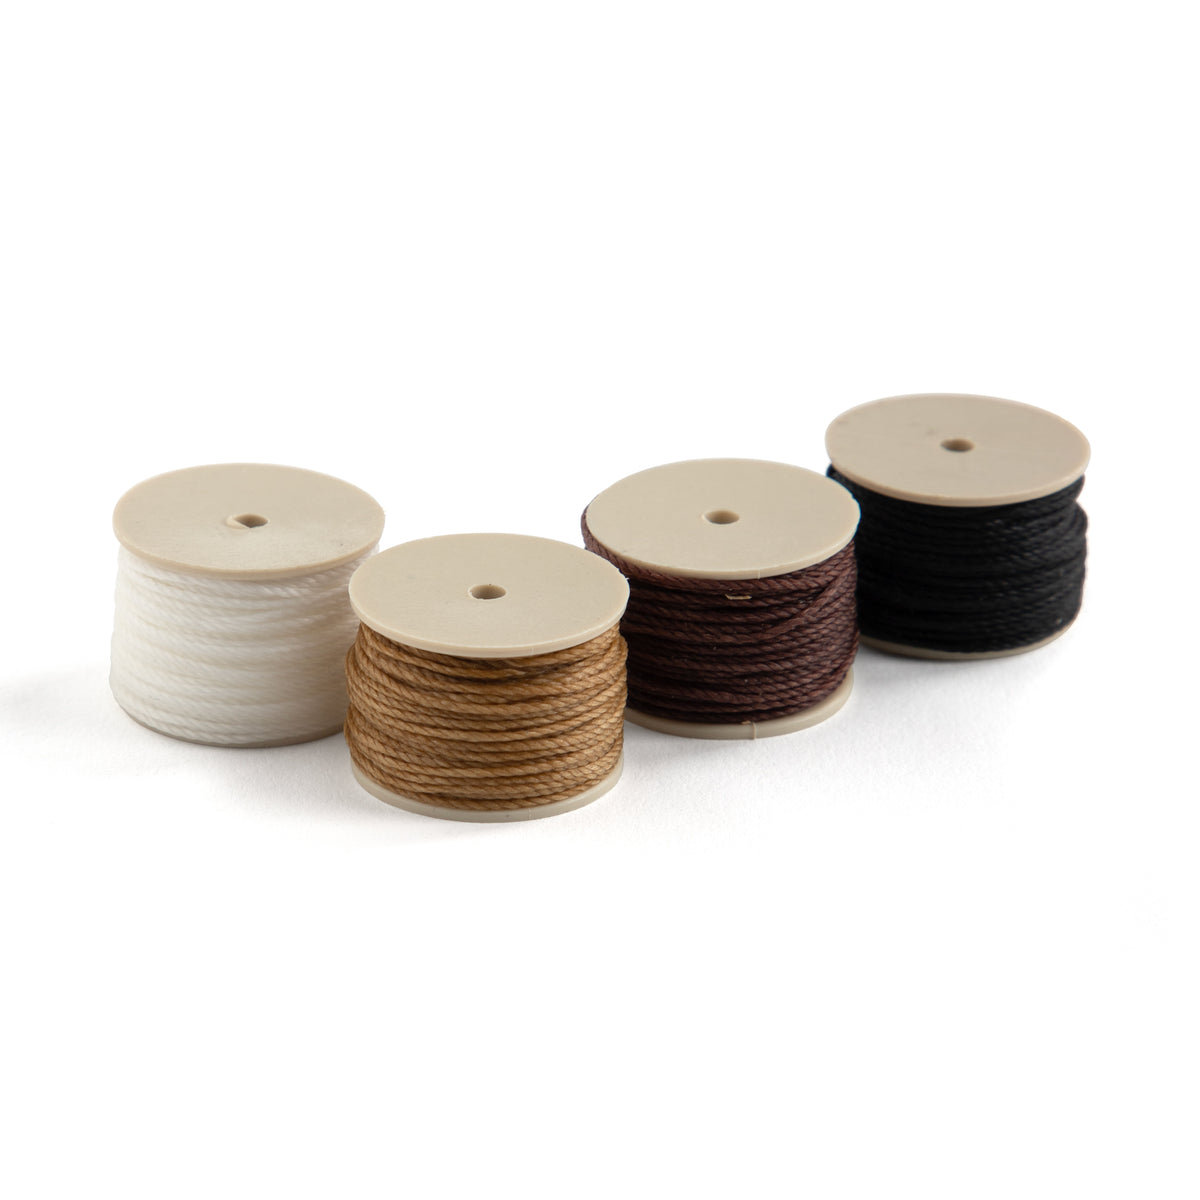 36x Sewing Threads Reels 400 Yards per Spool for Embroidery Stitching Hand, Size: 12.2cmx15cmx7.2cm